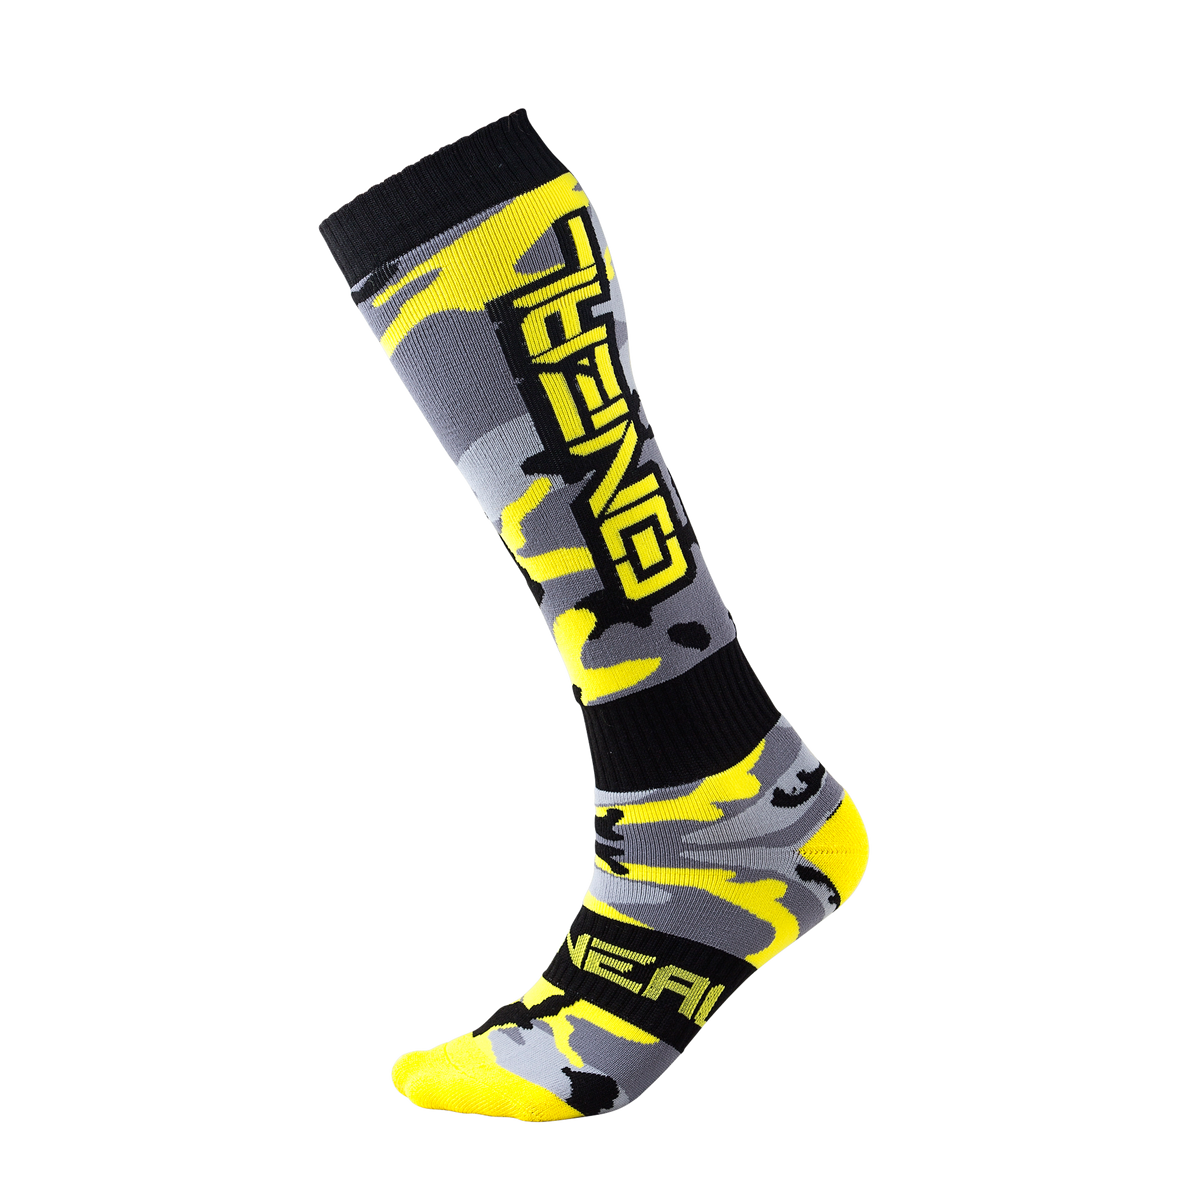 https://cdn.oneal.eu/assets/importedProductImages/ACCESSORIES/PRO%20MX%20SOCKS/HUNTER/2017_ONeal_MX_Sock_Hunter.png